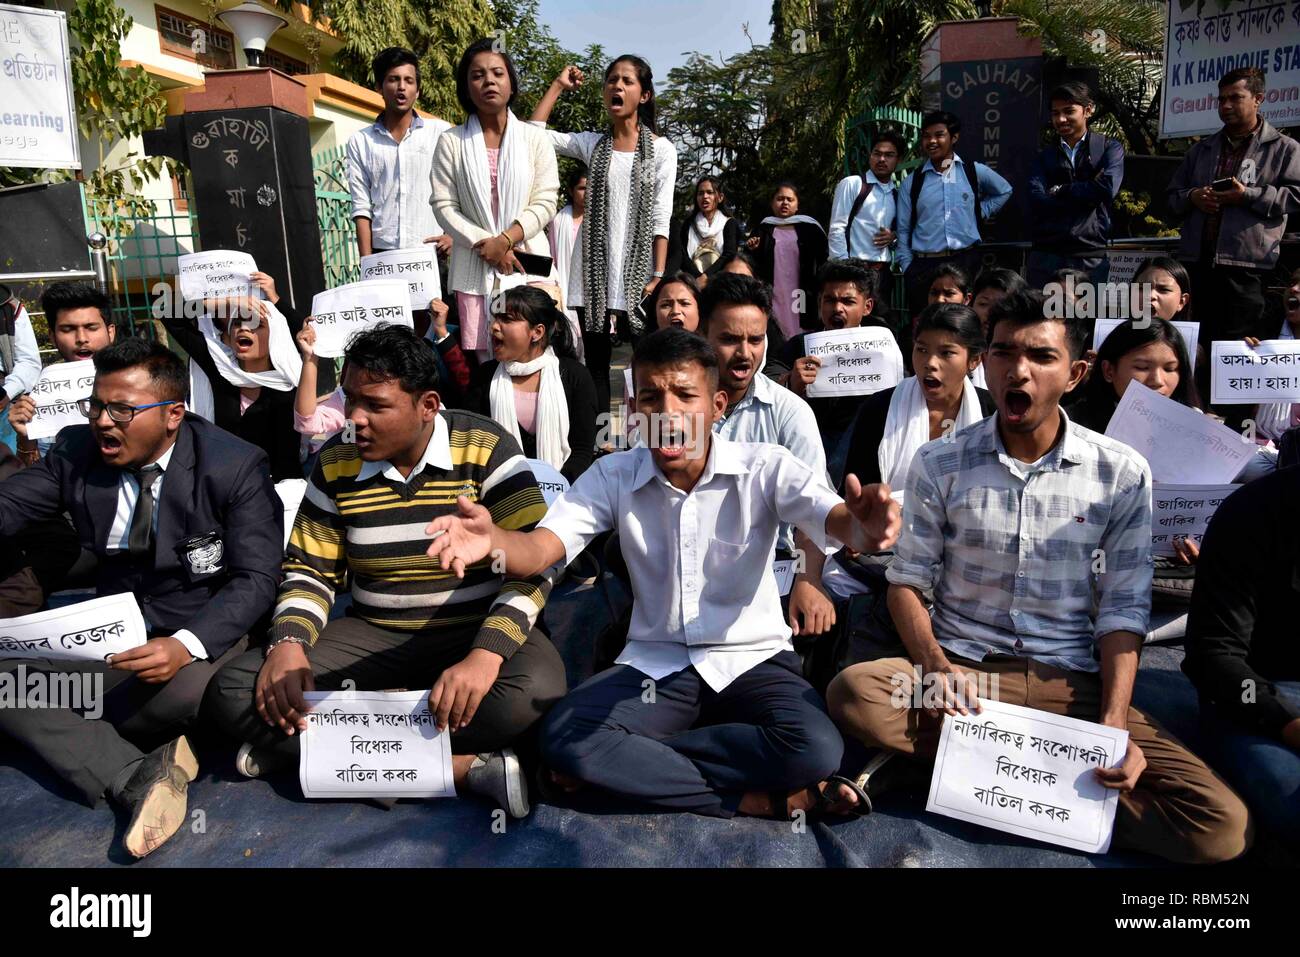 Guwahati, Assam, India. 11th Jan 2019. Guwahati Commerce College students stage a protest and raised slogan against Citizenship (Amendment) Bill, 2016 in Guwahati, Assam, India on Friday, January 11, 2019. India's lower house passed legislation that will grant citizenship to members of certain religious minorities but not Muslims. - The bill covers select groups -- including Hindus, Christians and Sikhs -- who moved from Bangladesh, Pakistan and Afghanistan and who have lived in India for at least six years. Credit: David Talukdar/Alamy Live News Stock Photo